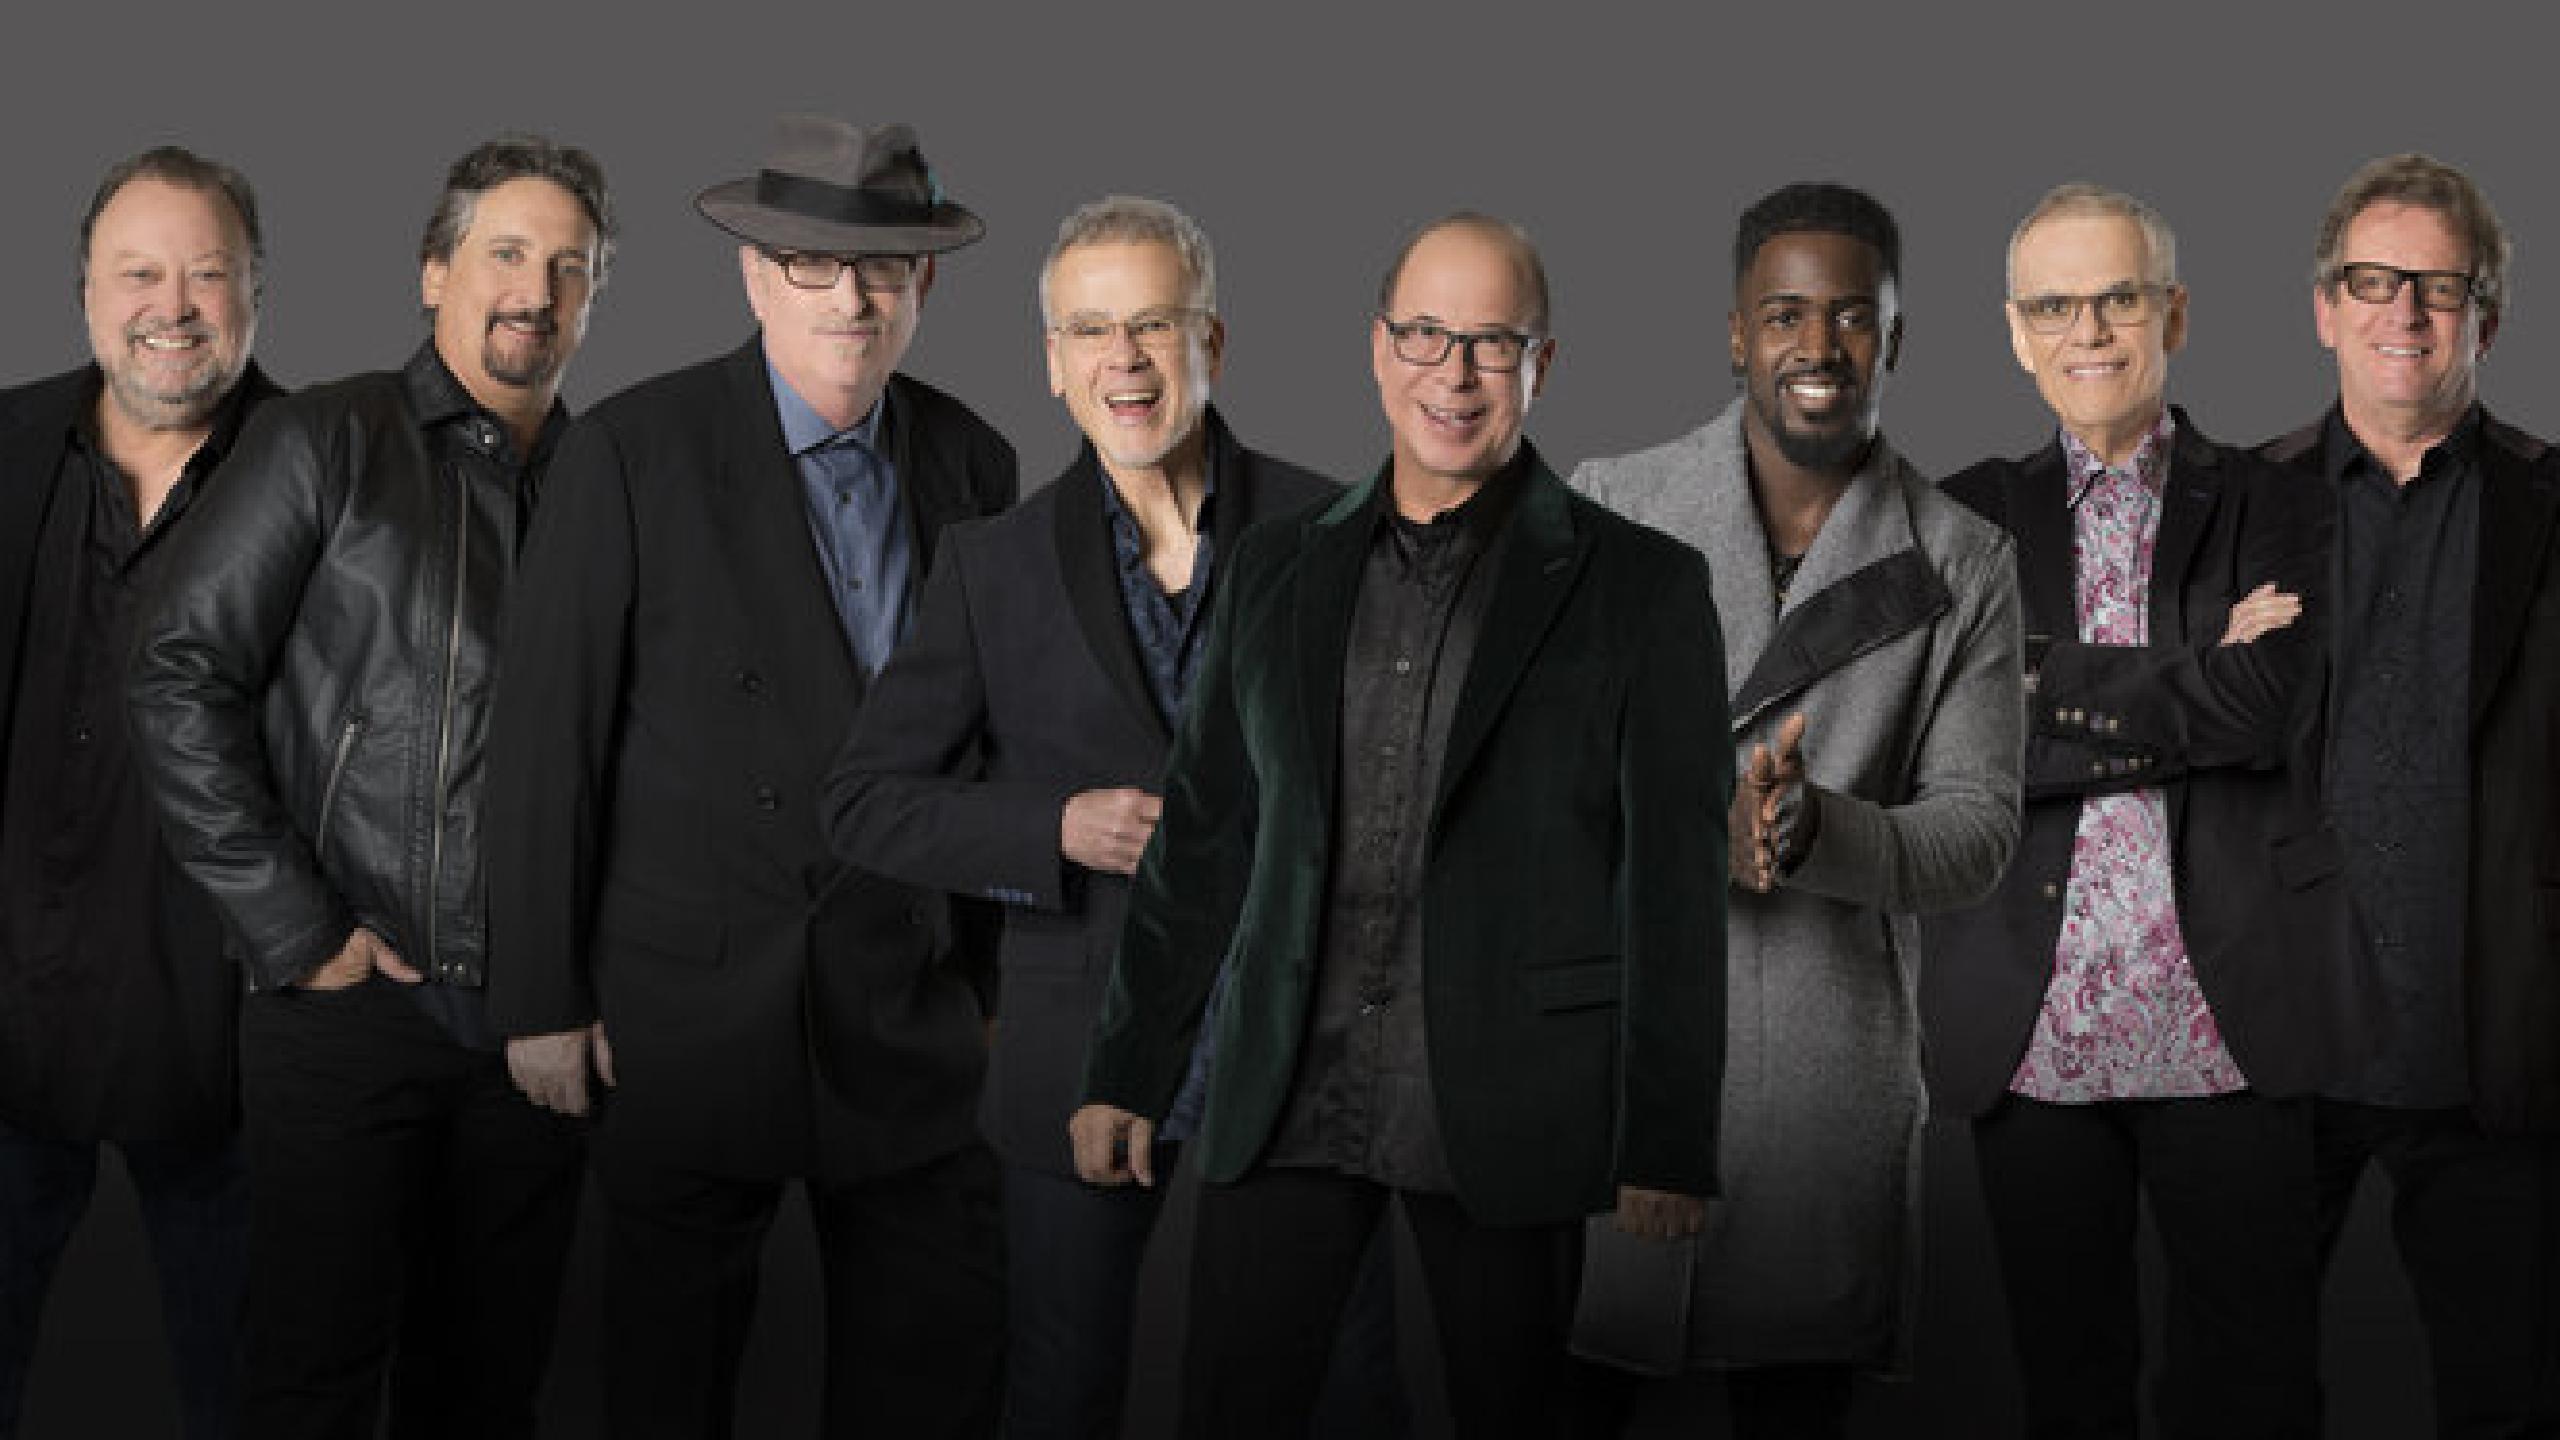 tower of power in concert